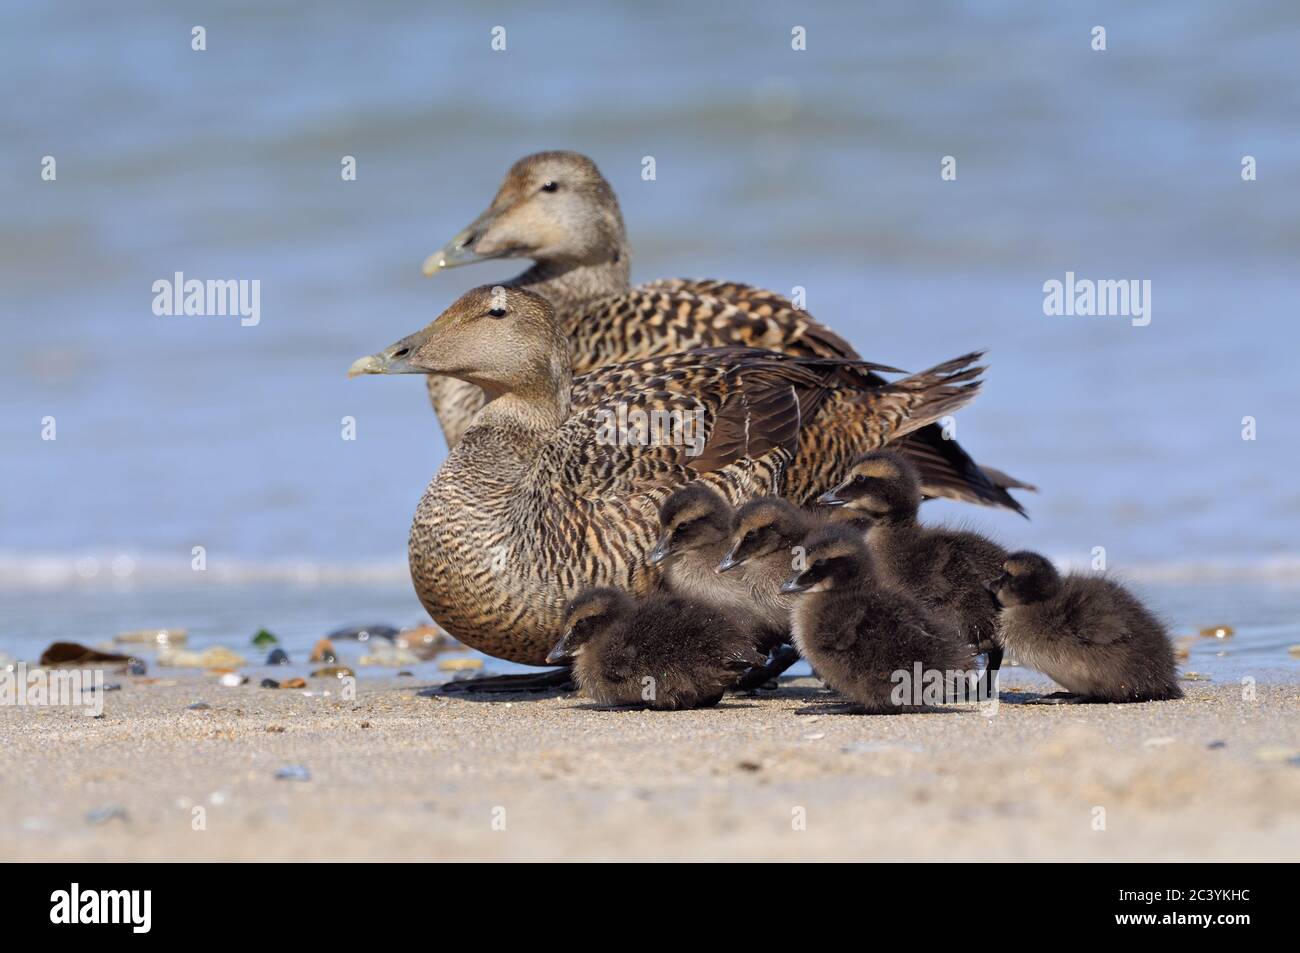 Common Eider ( Somateria mollissima ), two females with chicks, on the beach, looks cute, Helgoland, Germany, wildlife, Europe. Stock Photo